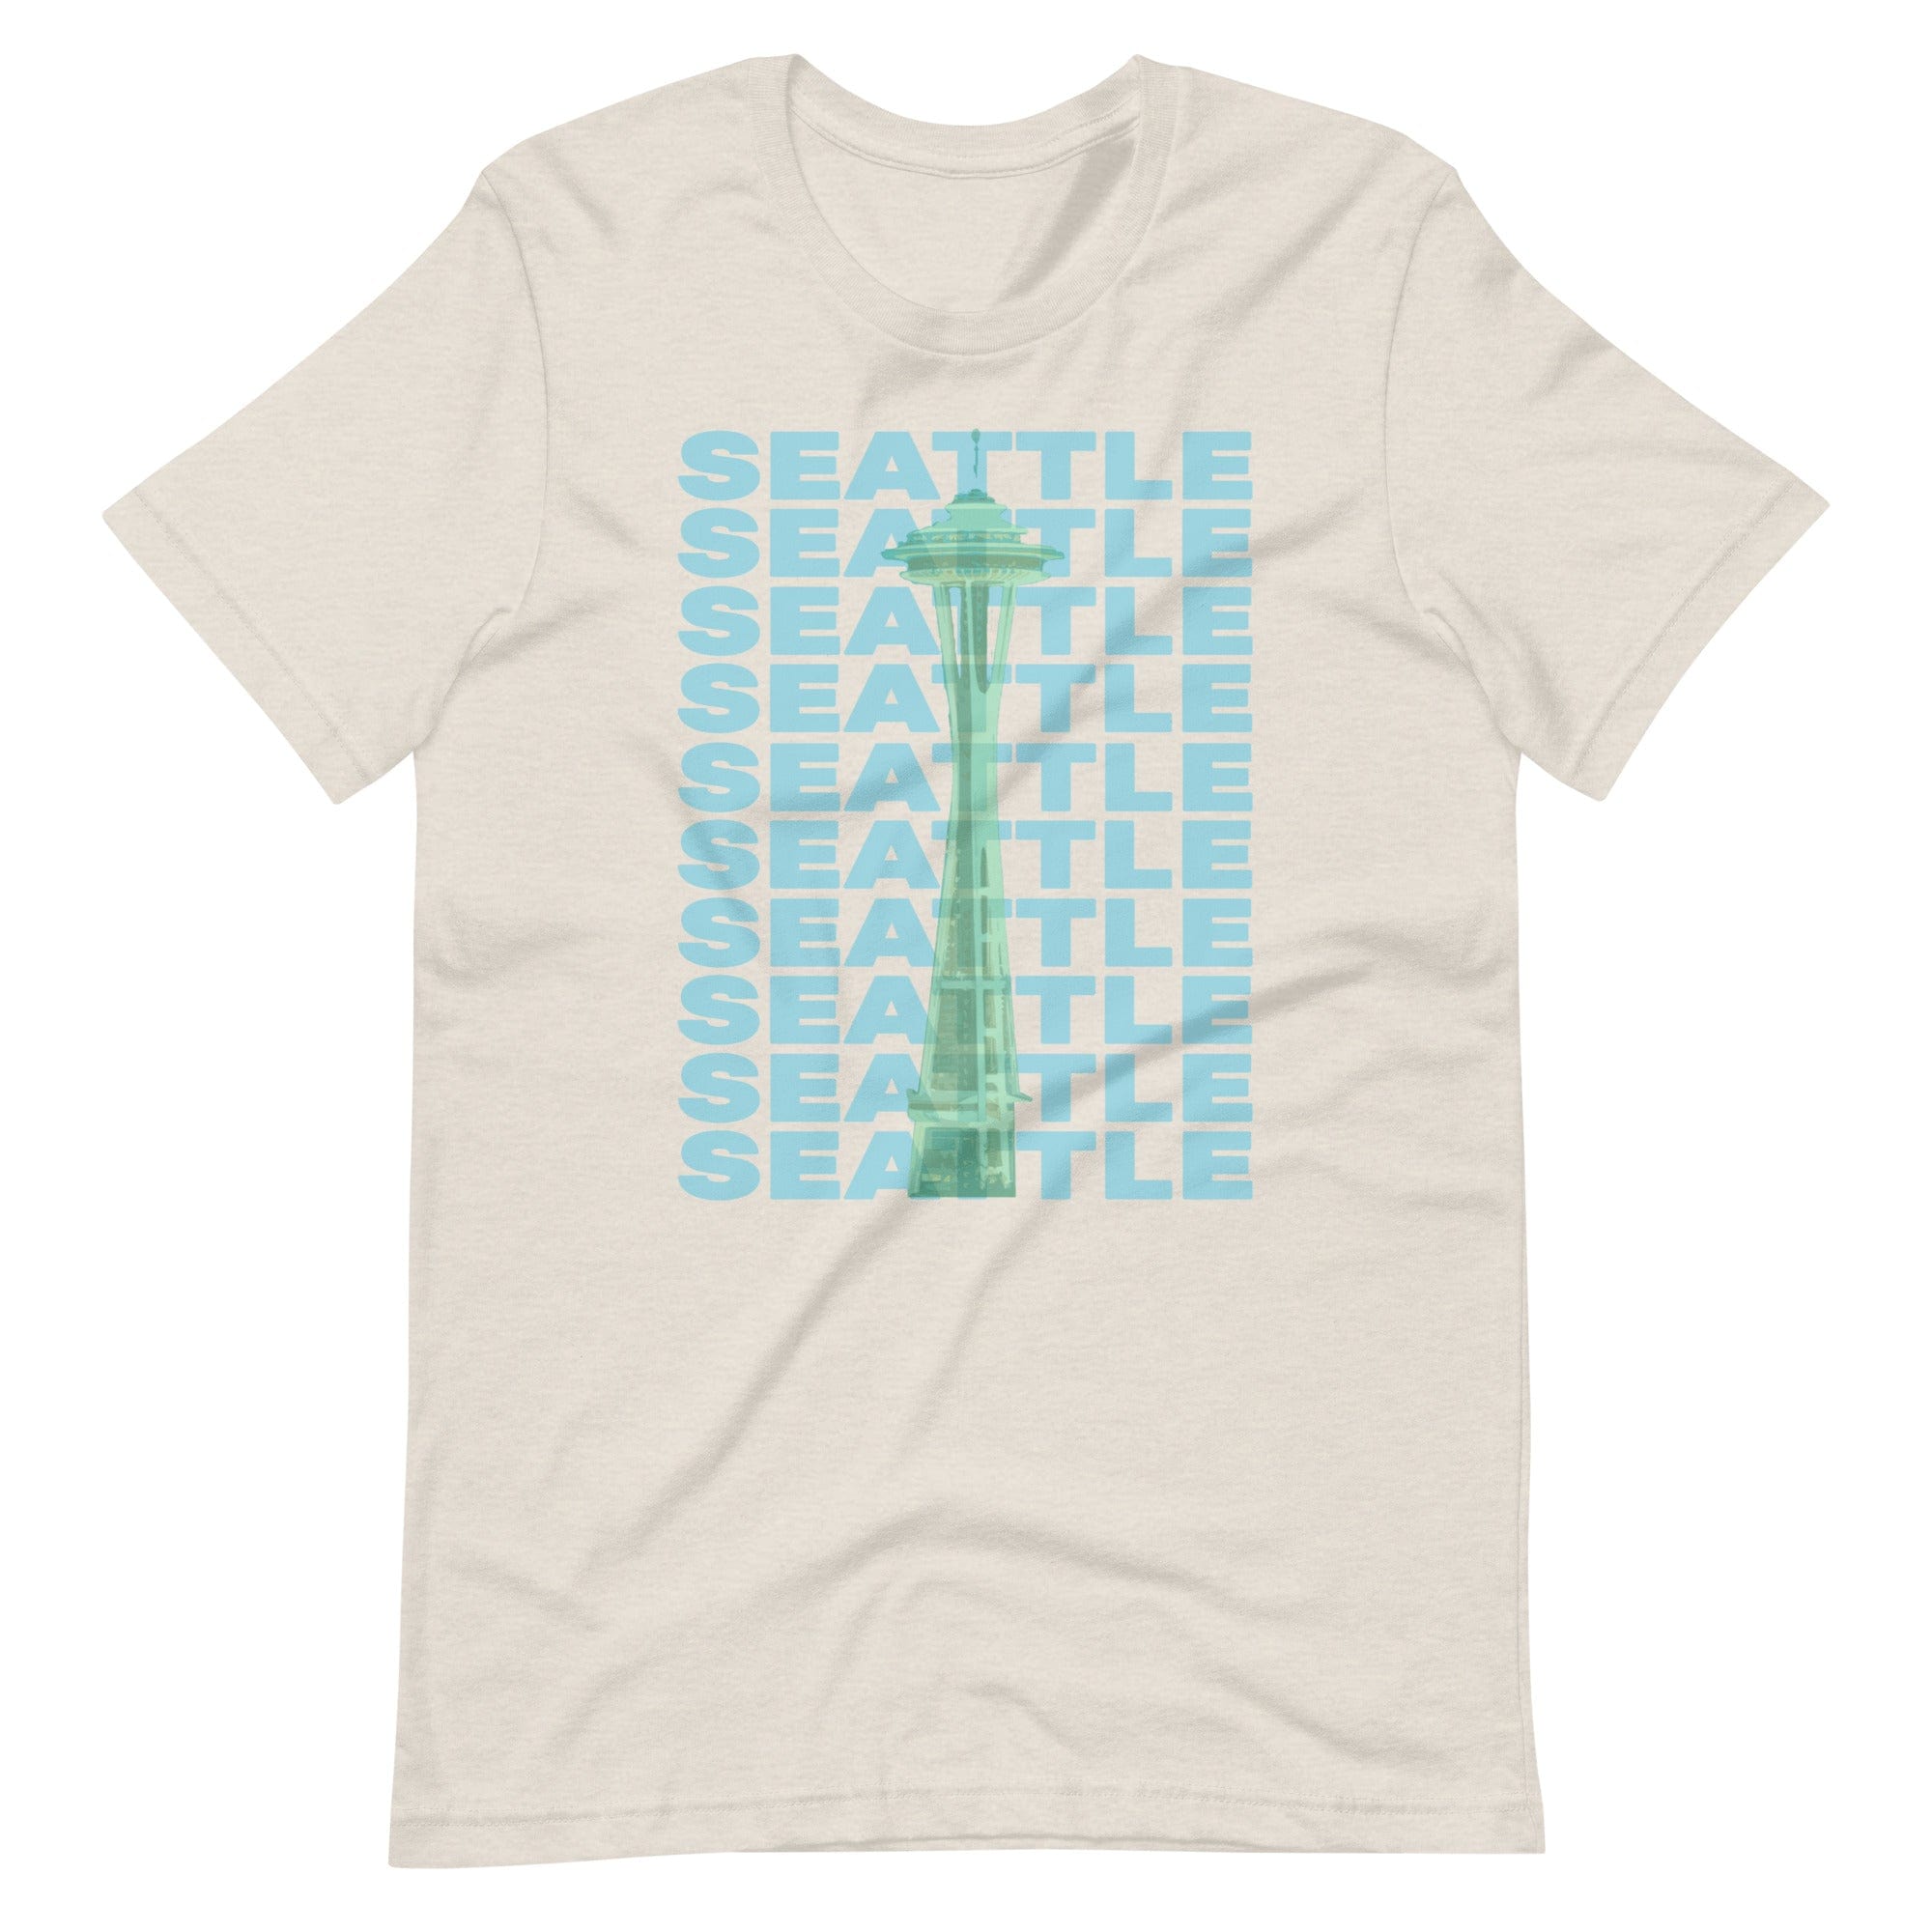 City Shirt Co Seattle Repeat T-Shirt Heather Dust / S